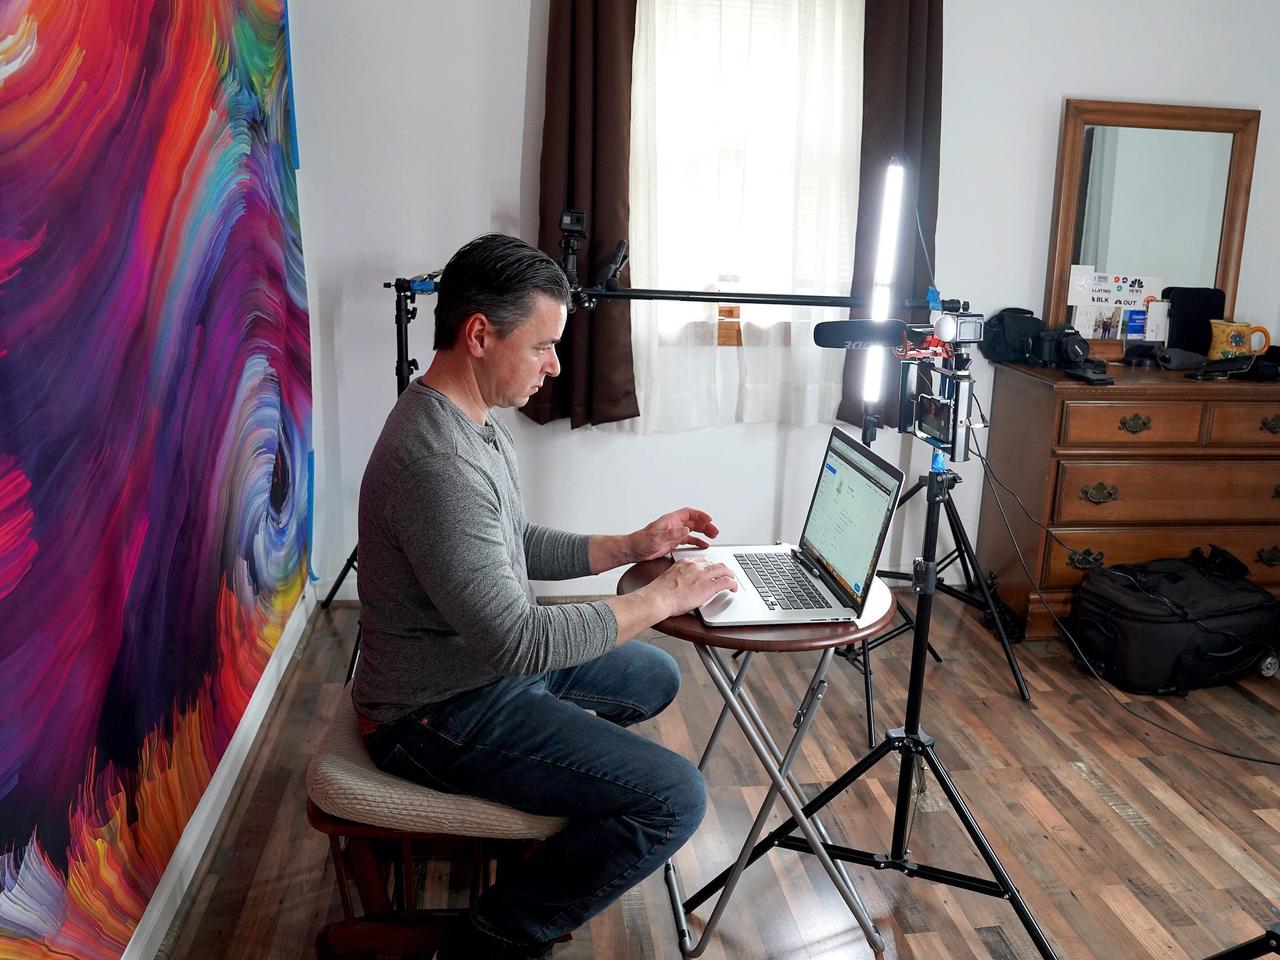 A video producer works from his at-home studio to conduct remote interviews with talent on April 19, 2020 in Franklin Square, New York.